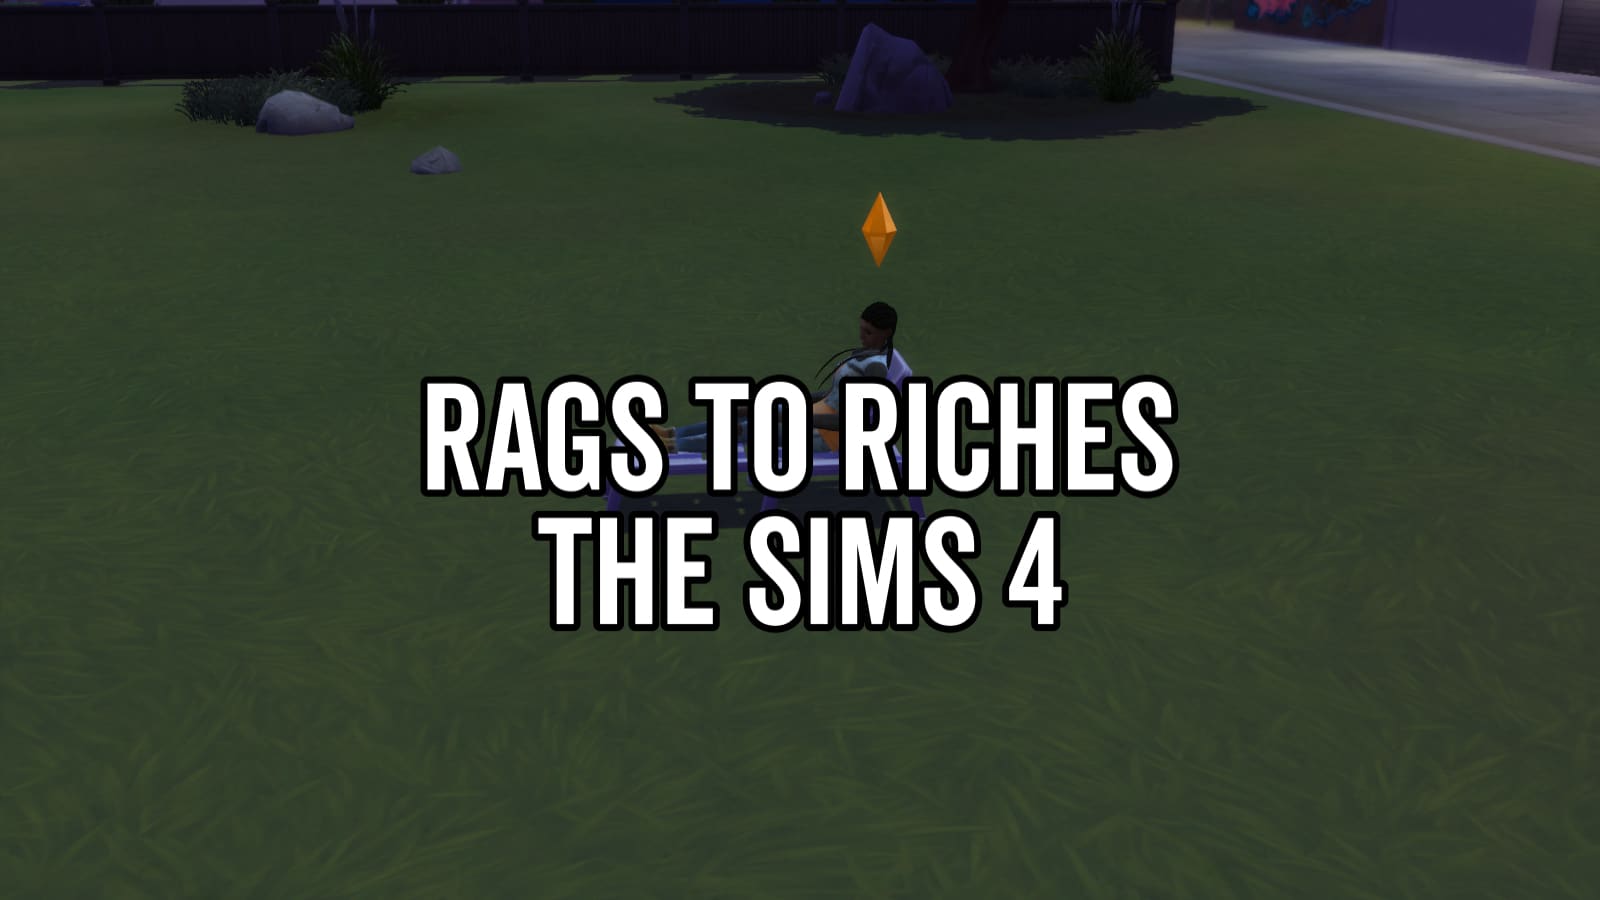 The Sims 4 Rags To Riches tips and tricks